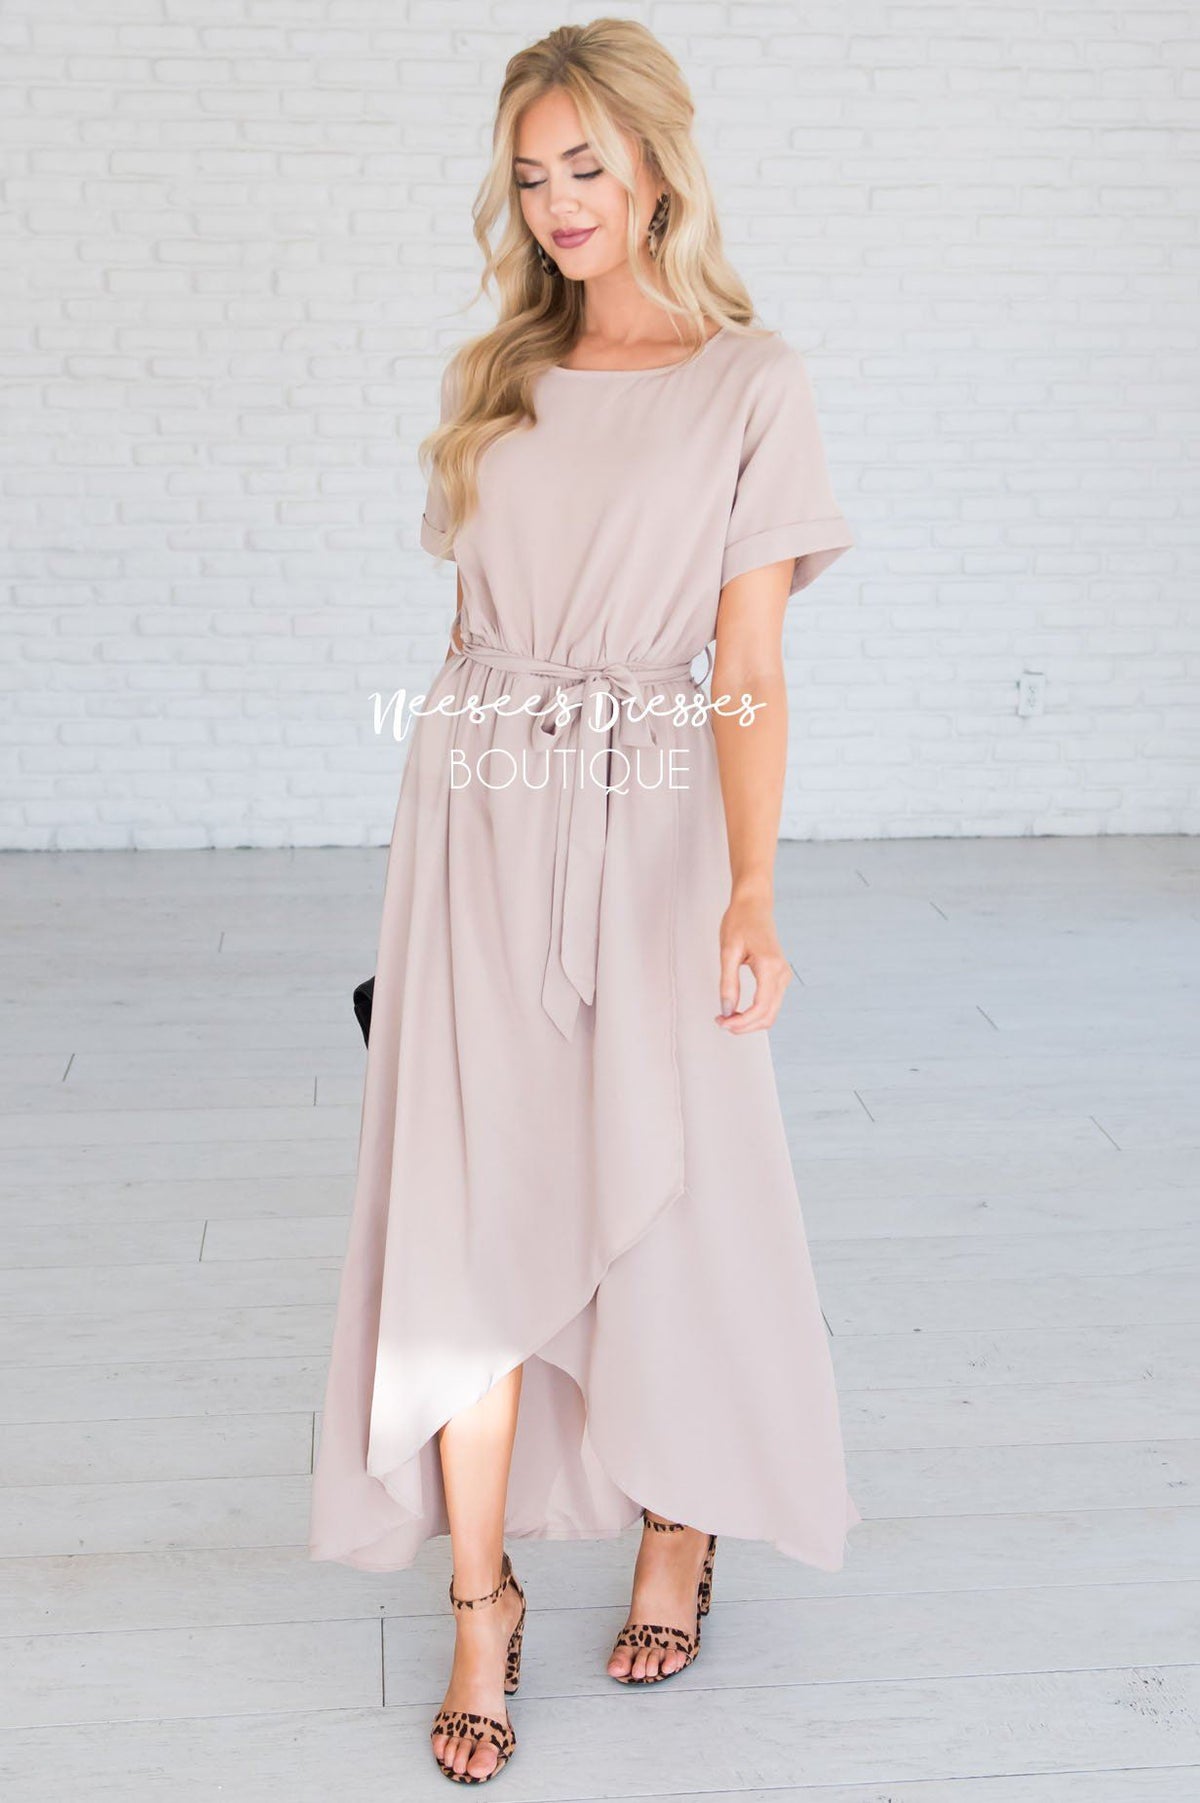 Beige Modest Church Dress | Best and Affordable Modest Boutique | Cute ...